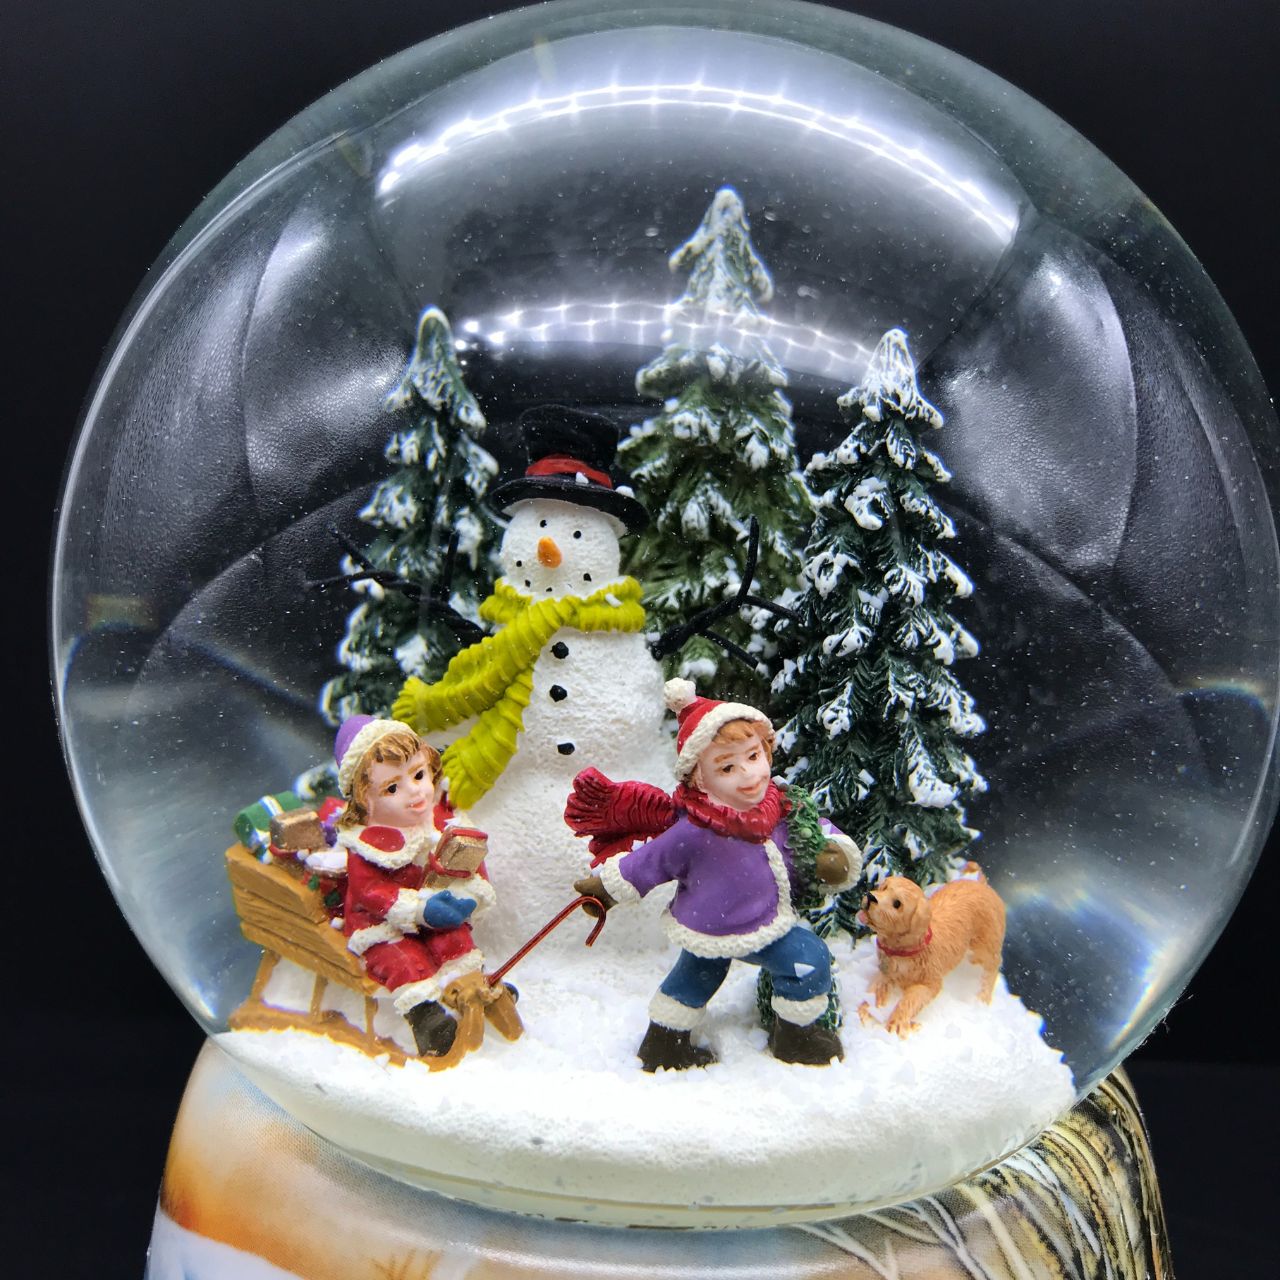 Music Box World Snow Globe Building a Snowman  Snow globe build a snowman. In the ball full of snow, two children with their sled pass by their snowman. Small snowy pine trees decorate the scene. The base is painted with snow-covered forest and village scenes.